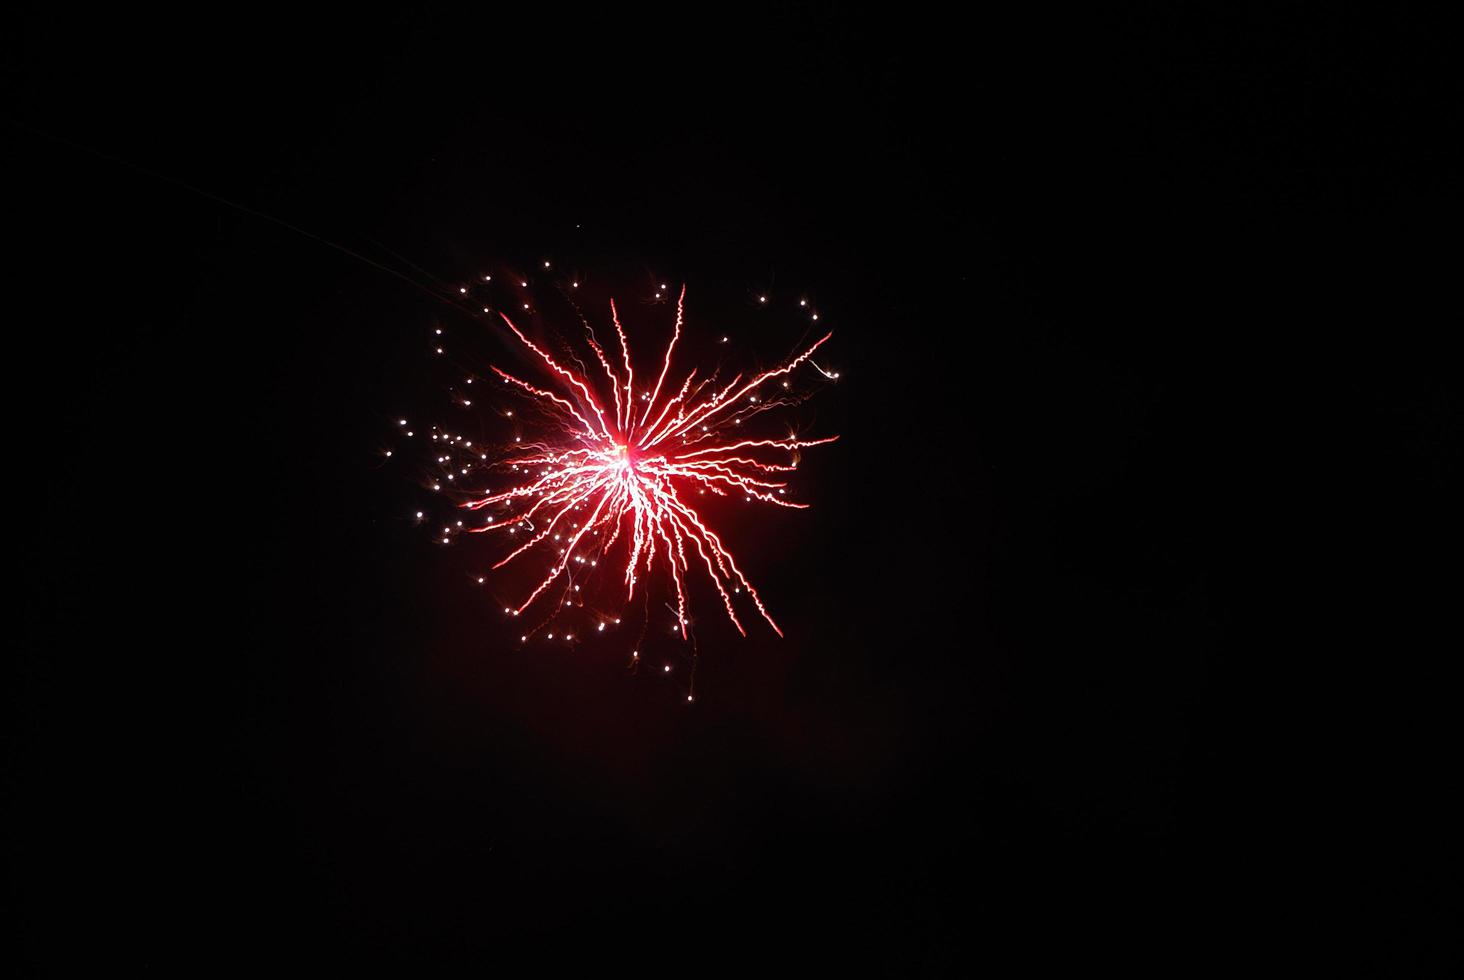 single high bright red explosion at a fireworks display on new year's eve photo